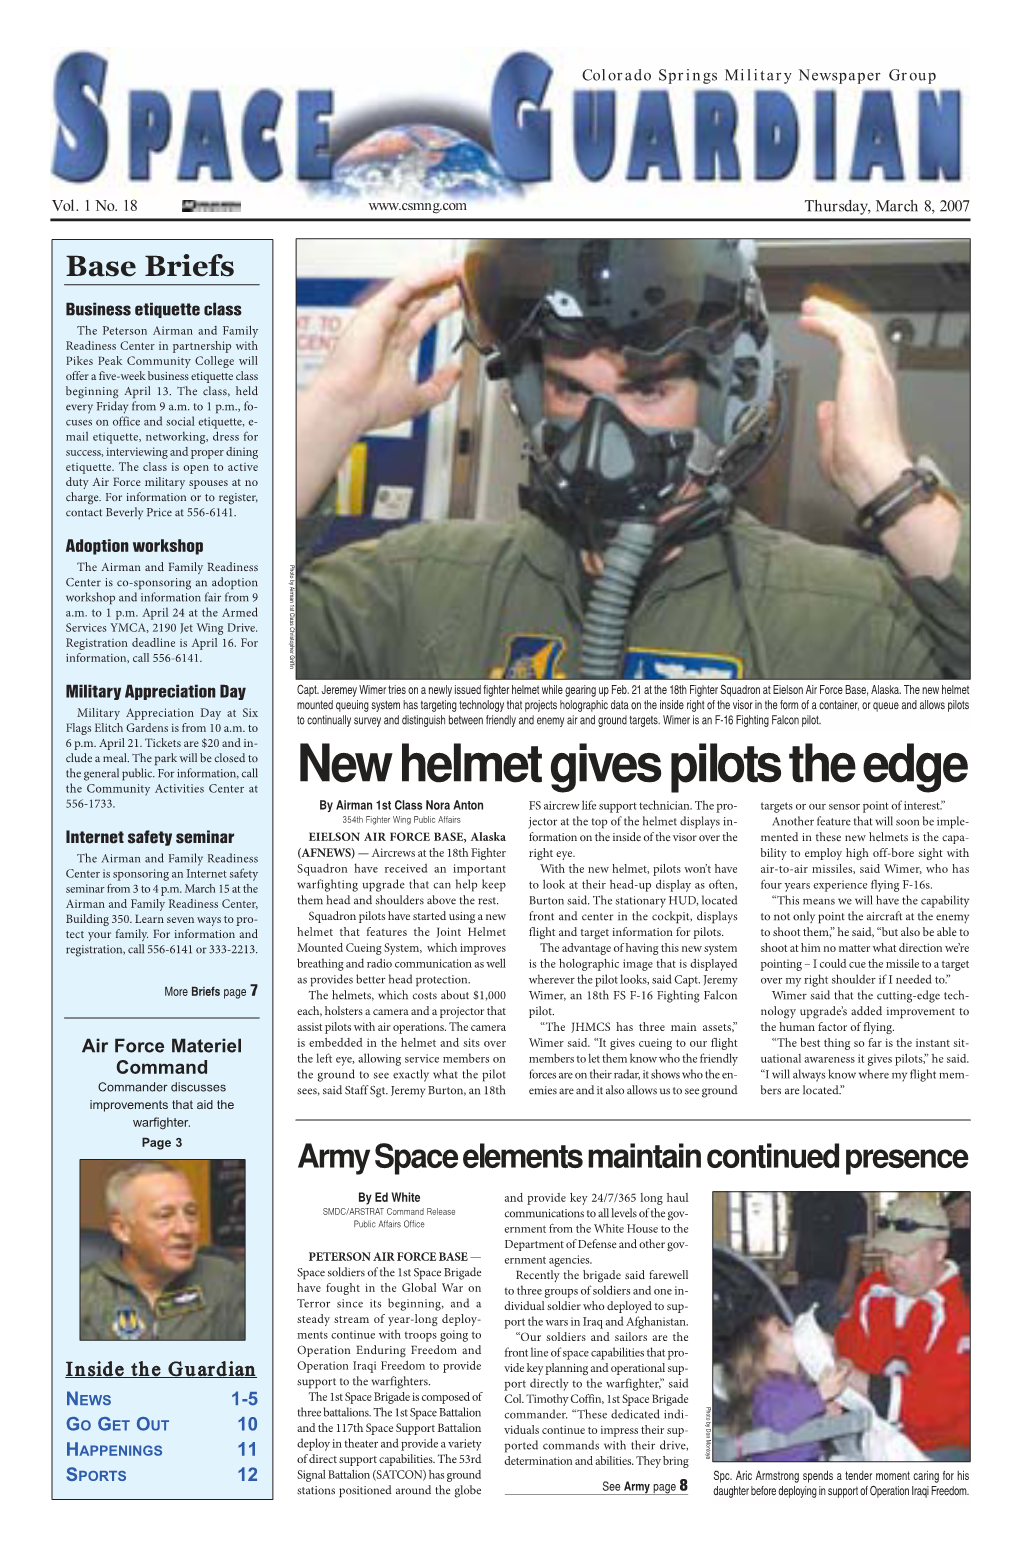 New Helmet Gives Pilots the Edge the Community Activities Center at 556-1733